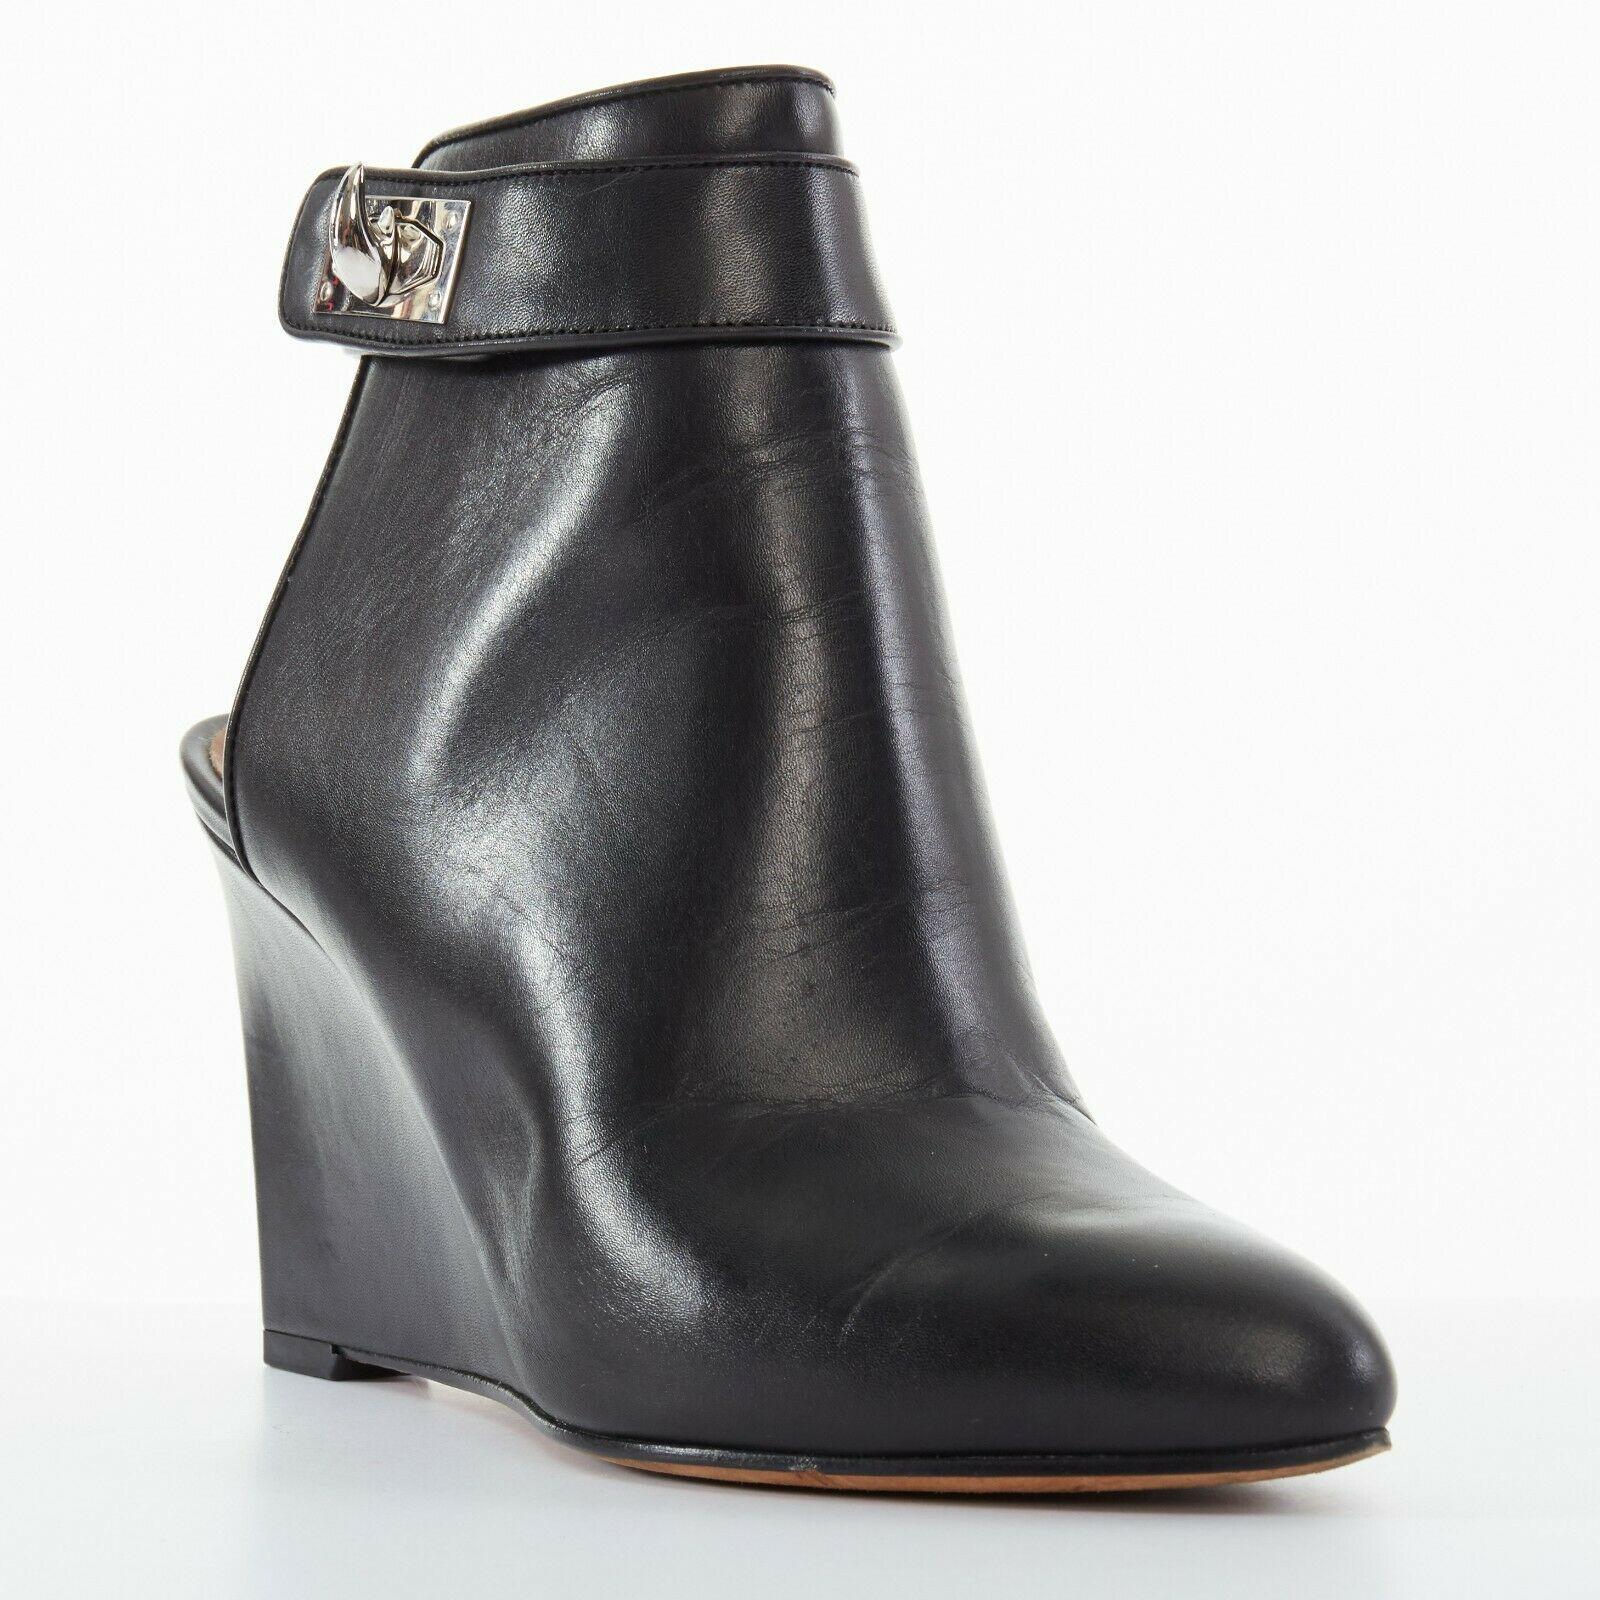 GIVENCHY TISCI black leather sharktooth turn lock mule ankle bootie wedge EU37.5
GIVENCHY BY RICCARDO TISCI
Black leather upper. 
Rounded pointy toe. 
Leather covered wedge heel. 
Attached ankle strap. 
Silver-tone hardware. 
Shark tooth turn lock